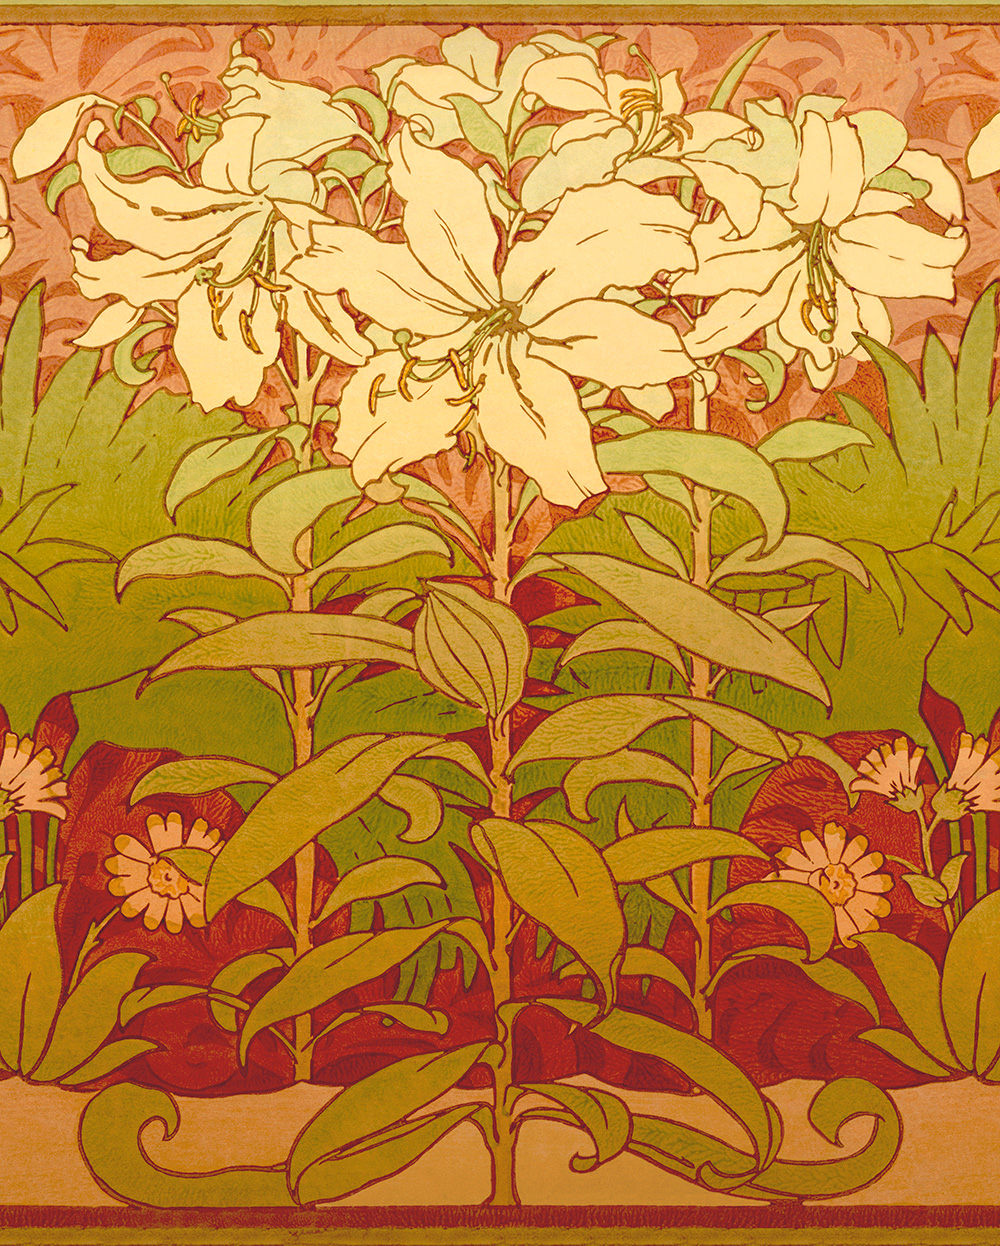 Lilies of the Field Art Poster